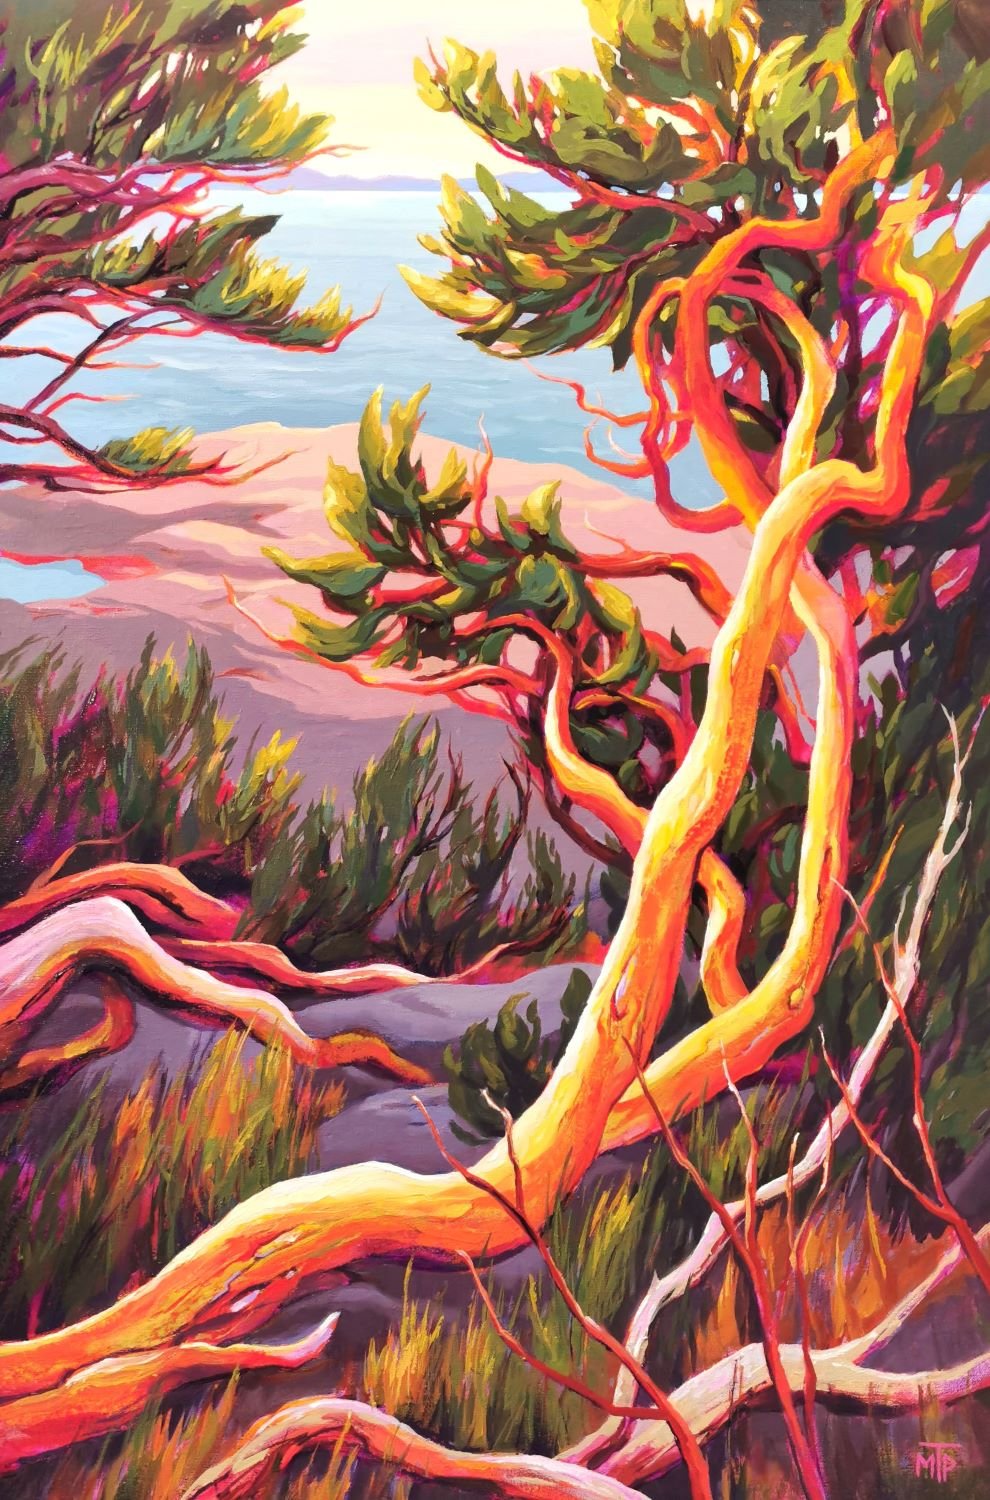  Arbutus Embrace    Acrylic on canvas, 36x24 inches, $2,500  